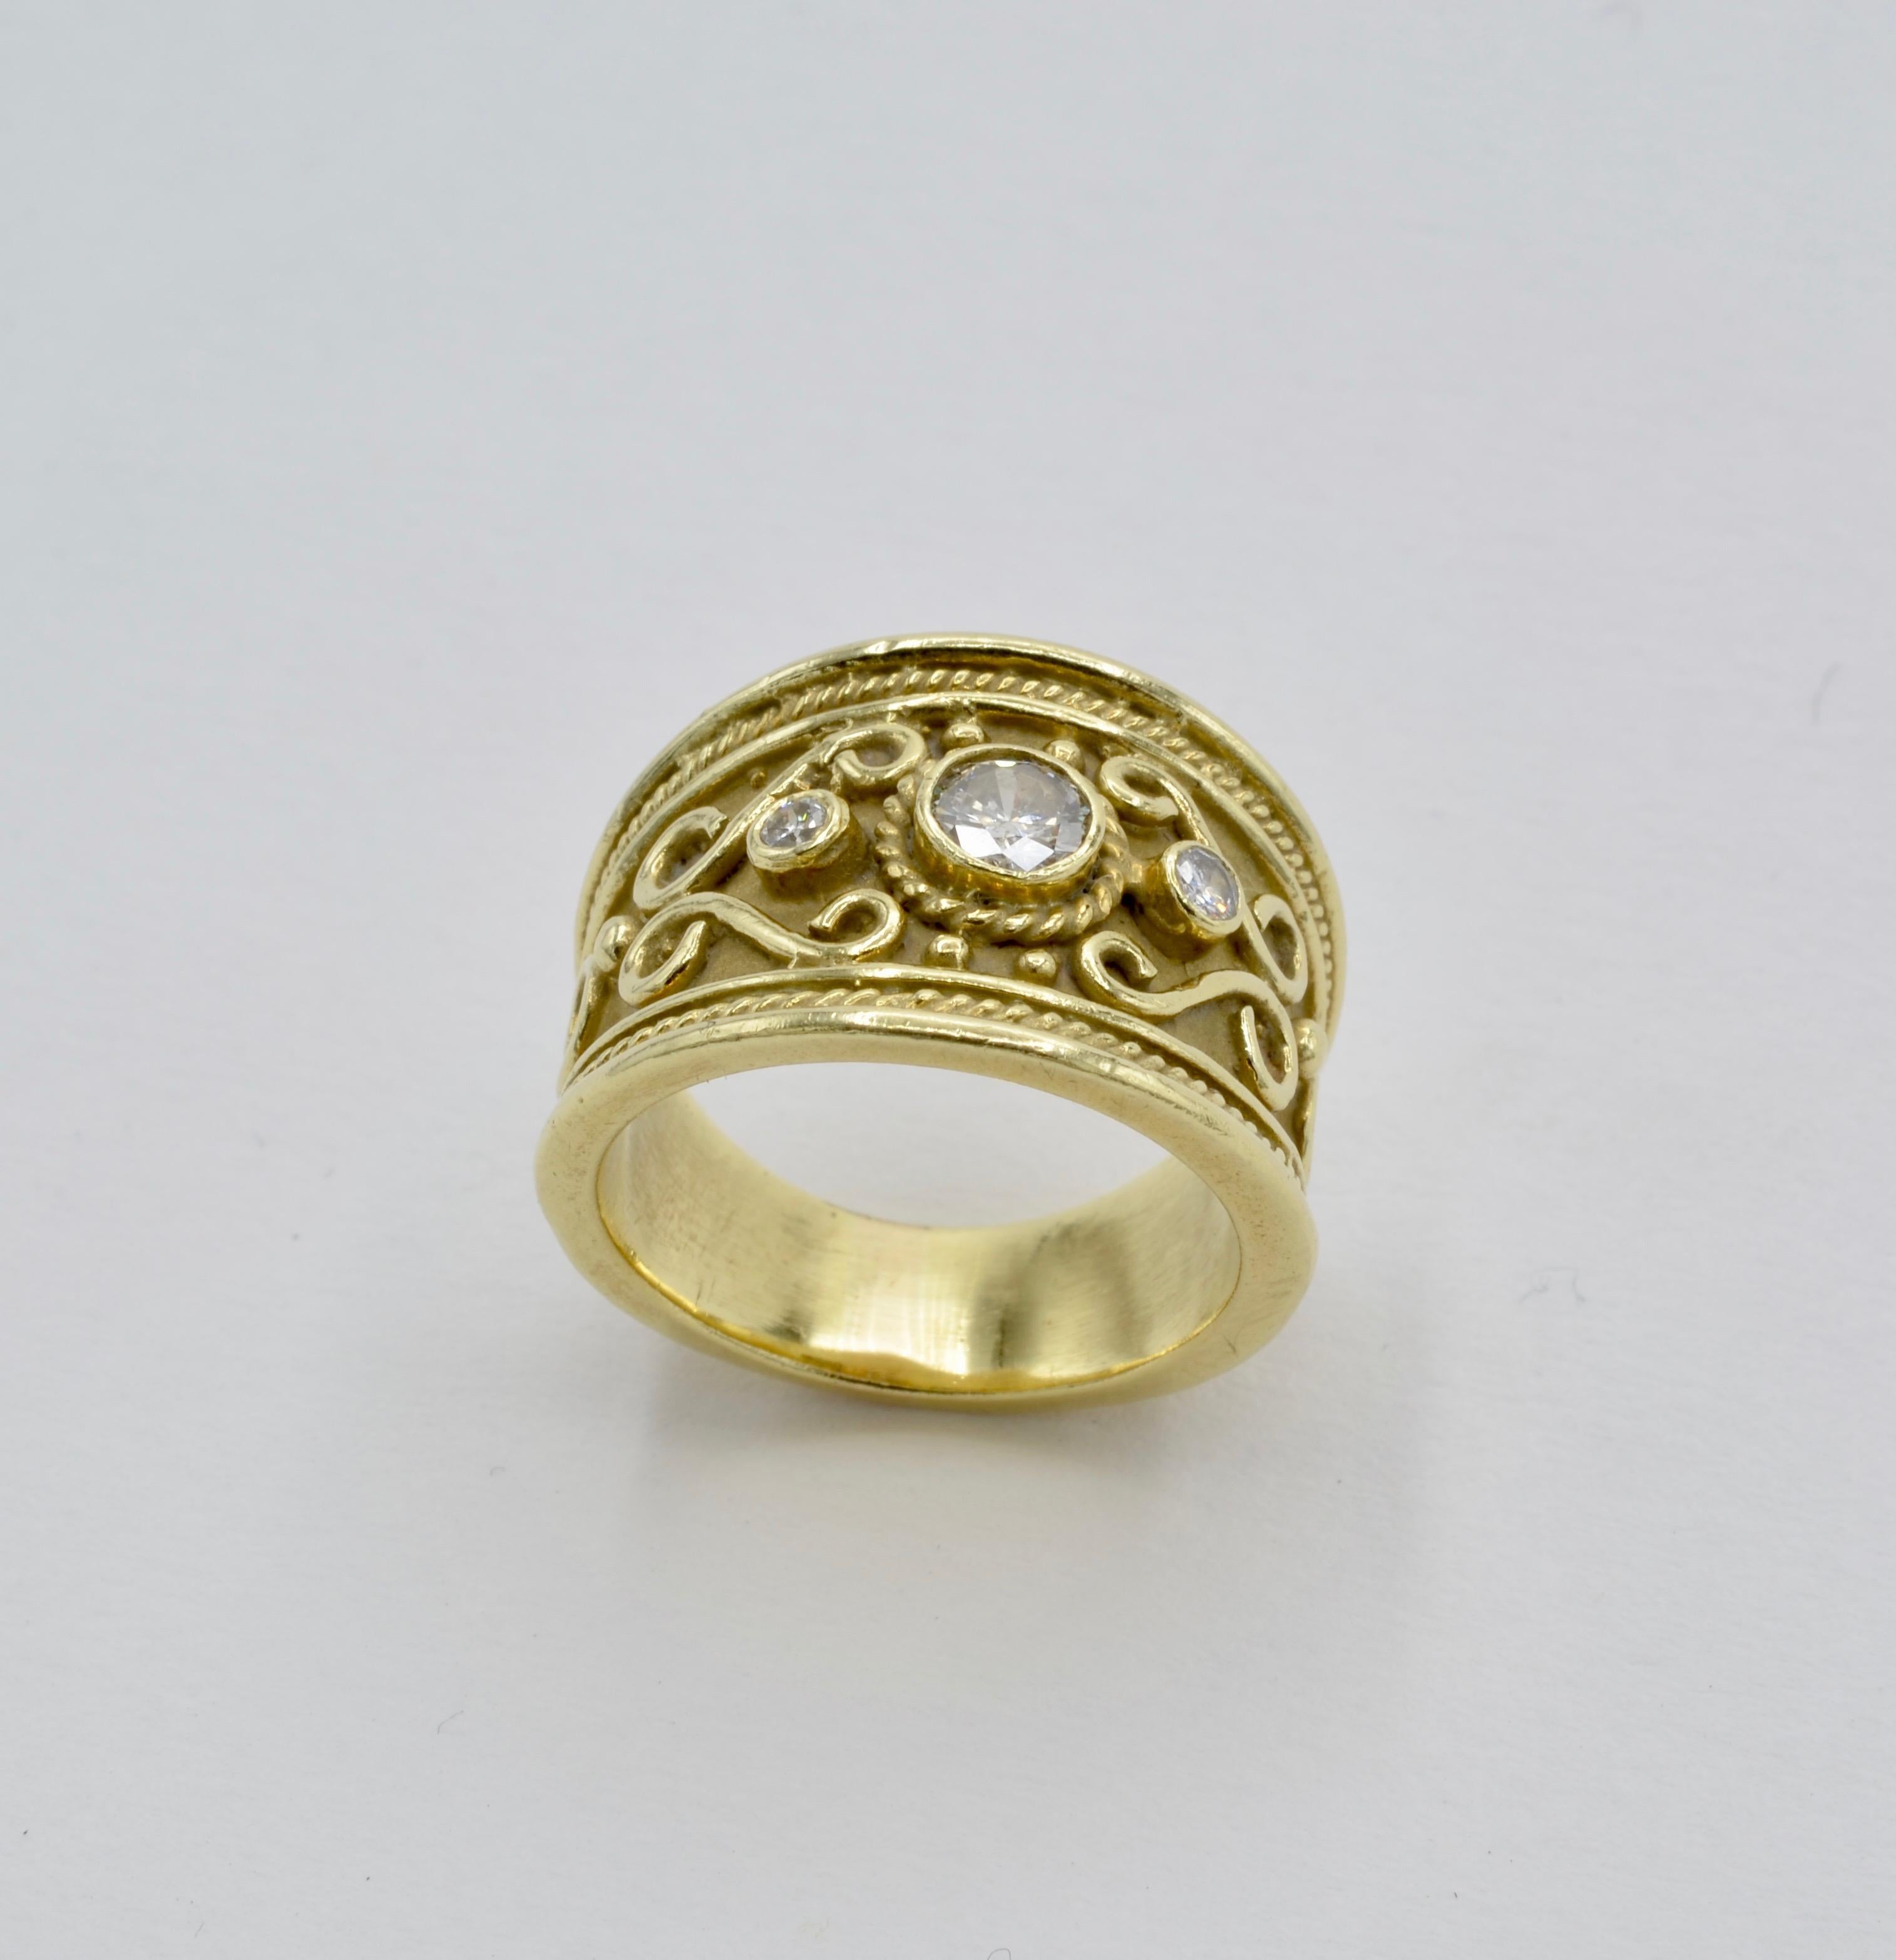 This regal wide band ring is adorned with a center diamond size 0.30 carats SI and two side accent diamonds- total diamond weight for the ring is 0.35 carats. Made of 14K Yellow gold with spirals and swirls, the Etruscan and Hellenist style ring is